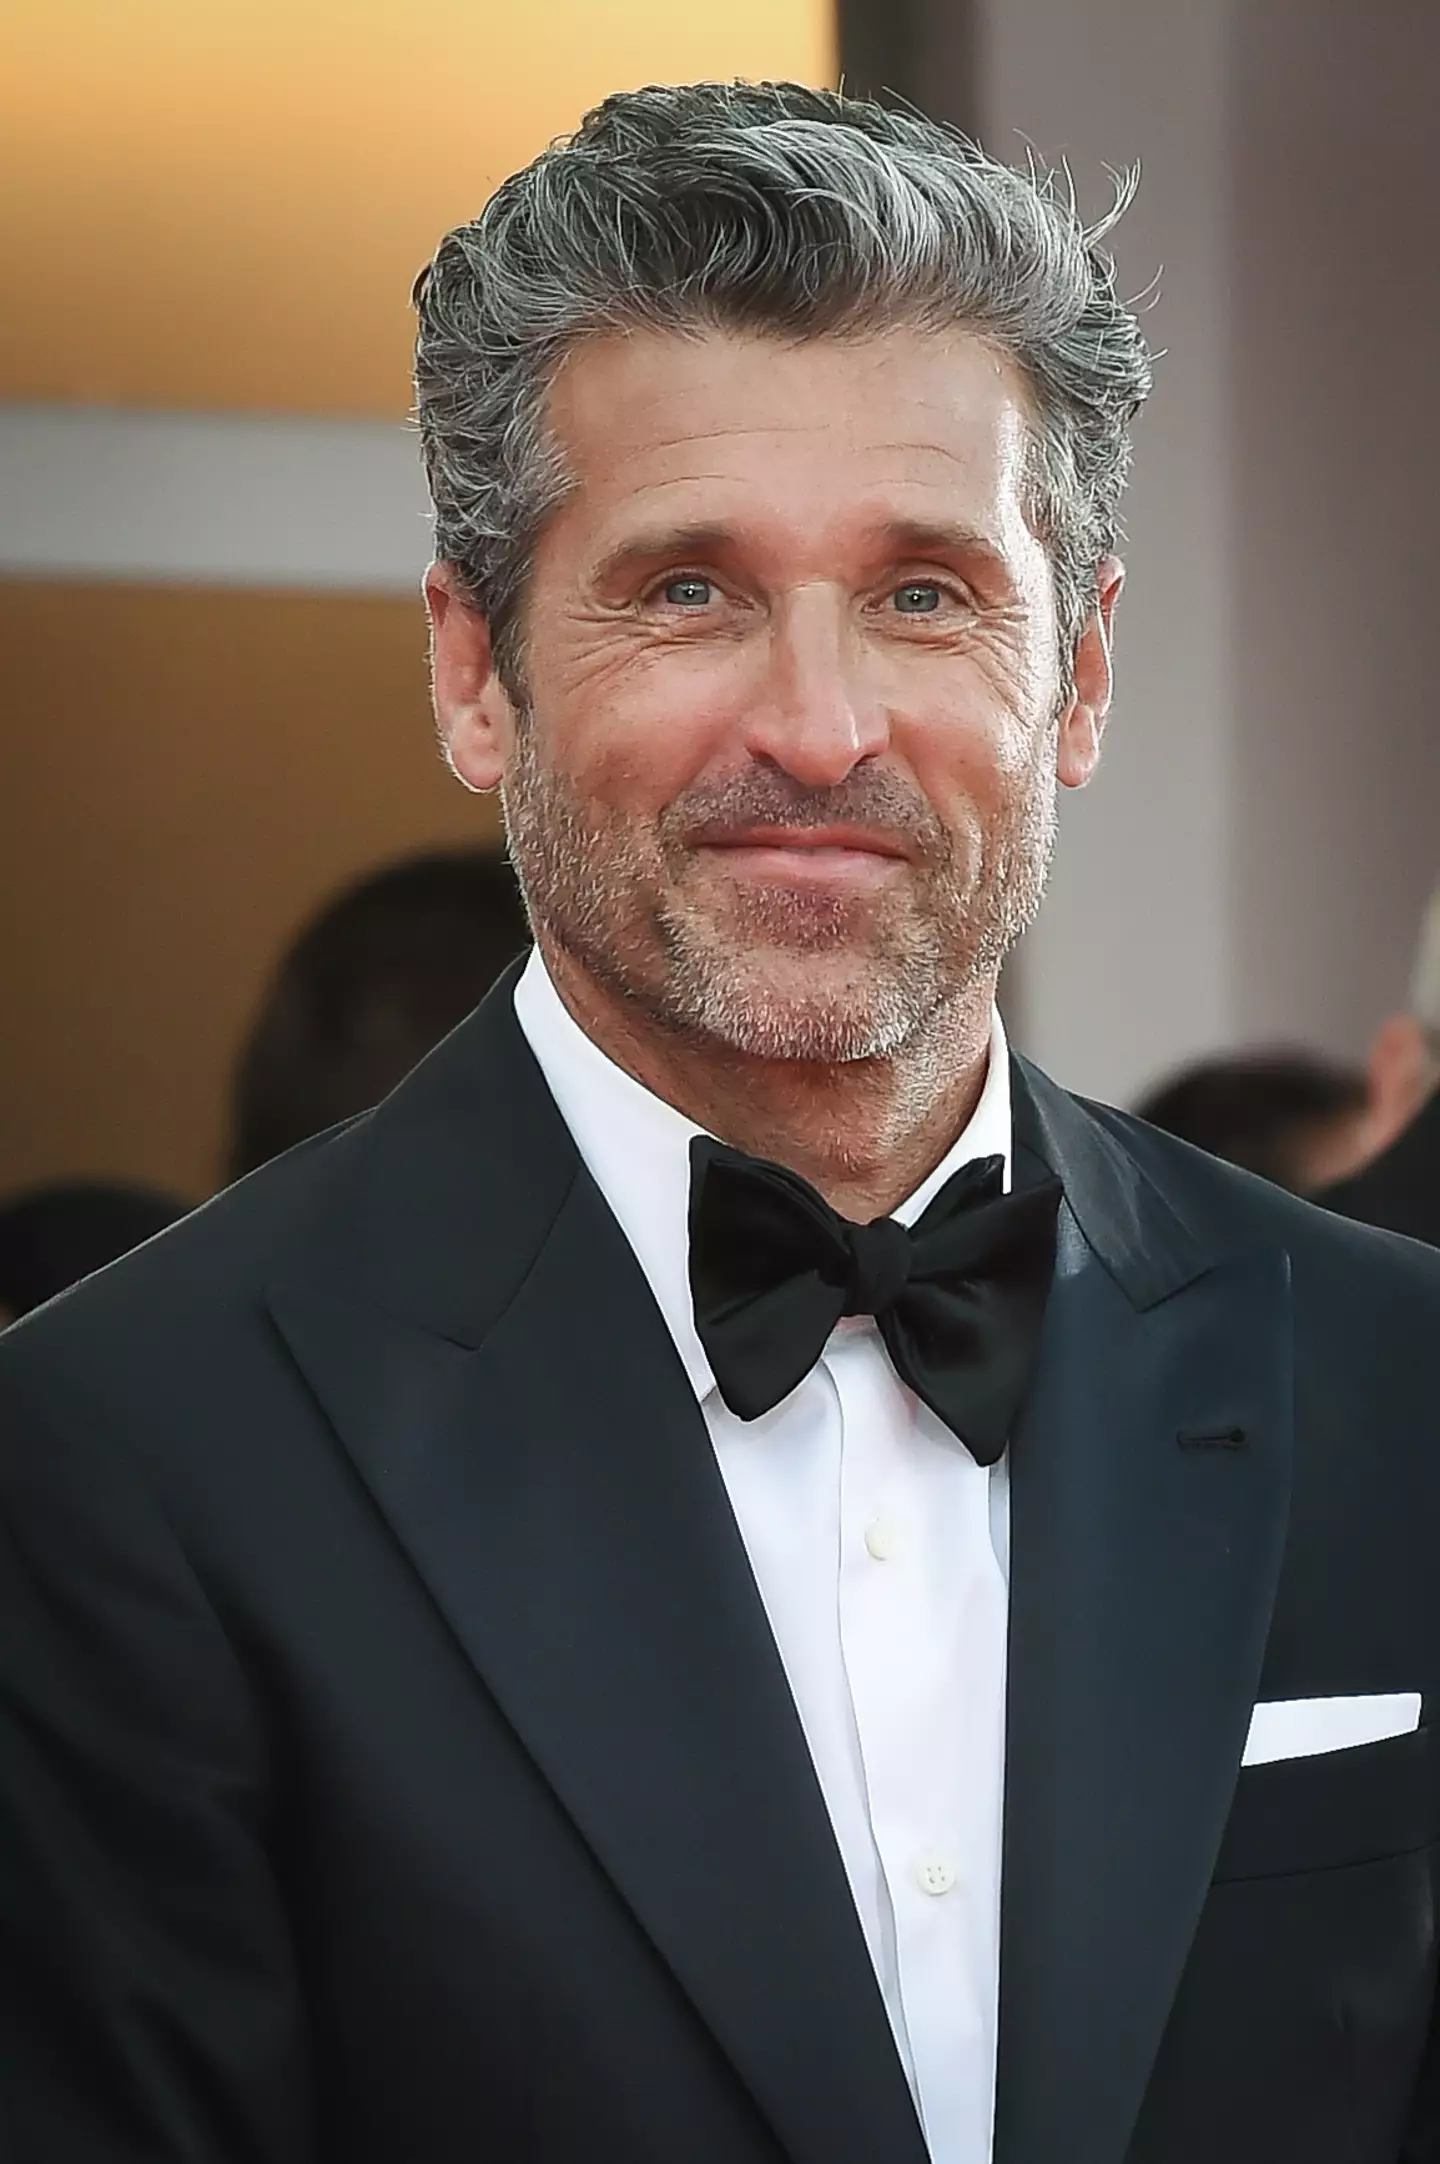 Patrick Dempsey has been named Sexiest Man Alive.